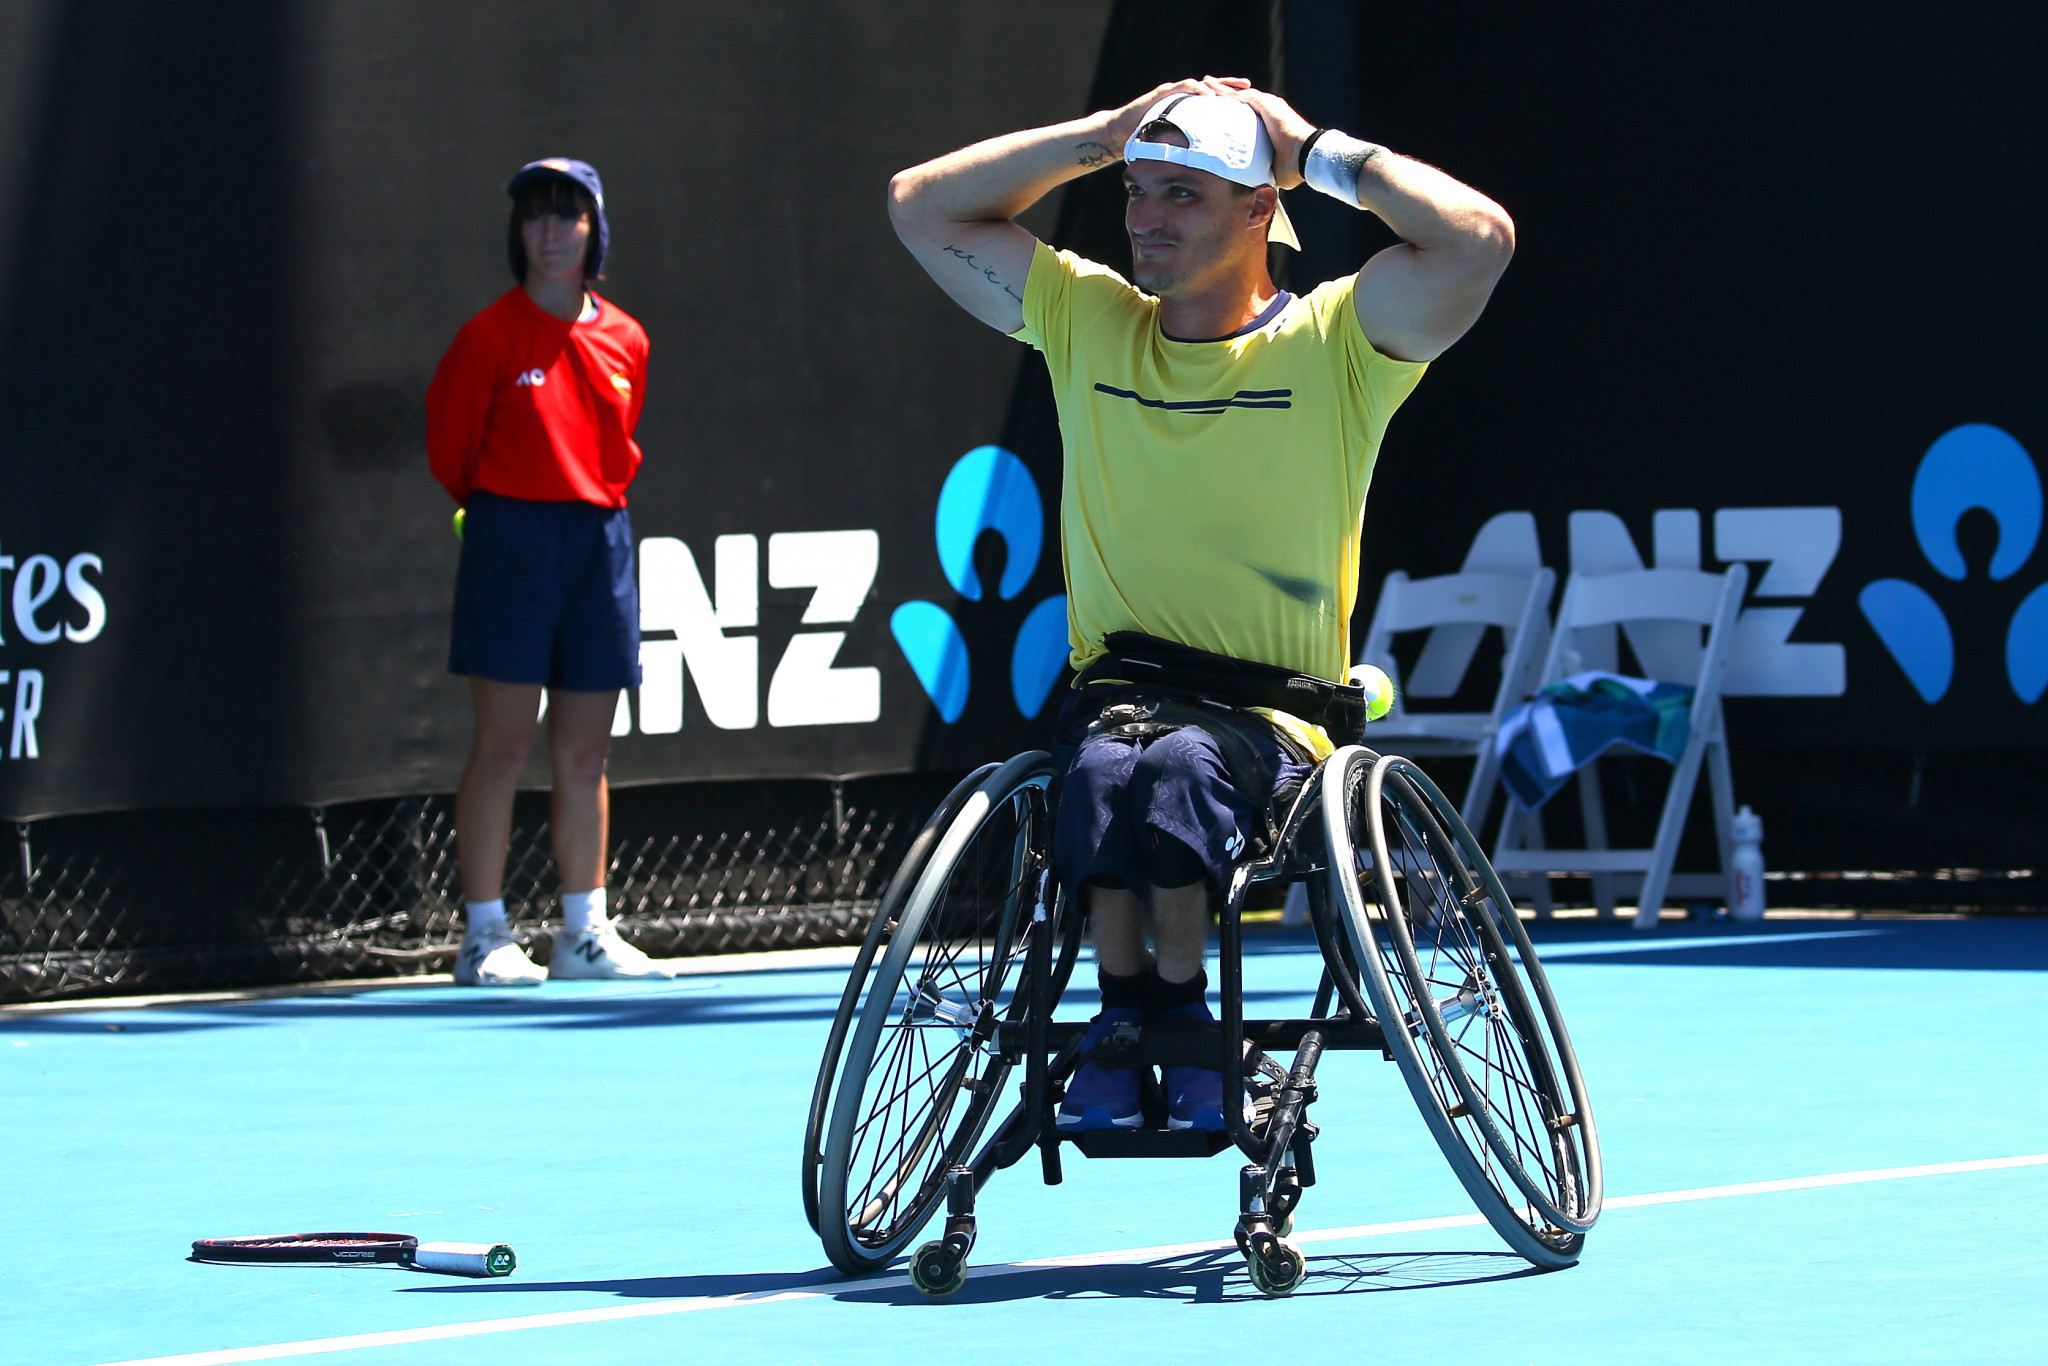 Gustavo Fernandez won the men's wheelchair singles title at the 2019 Australian Open ©Getty Images